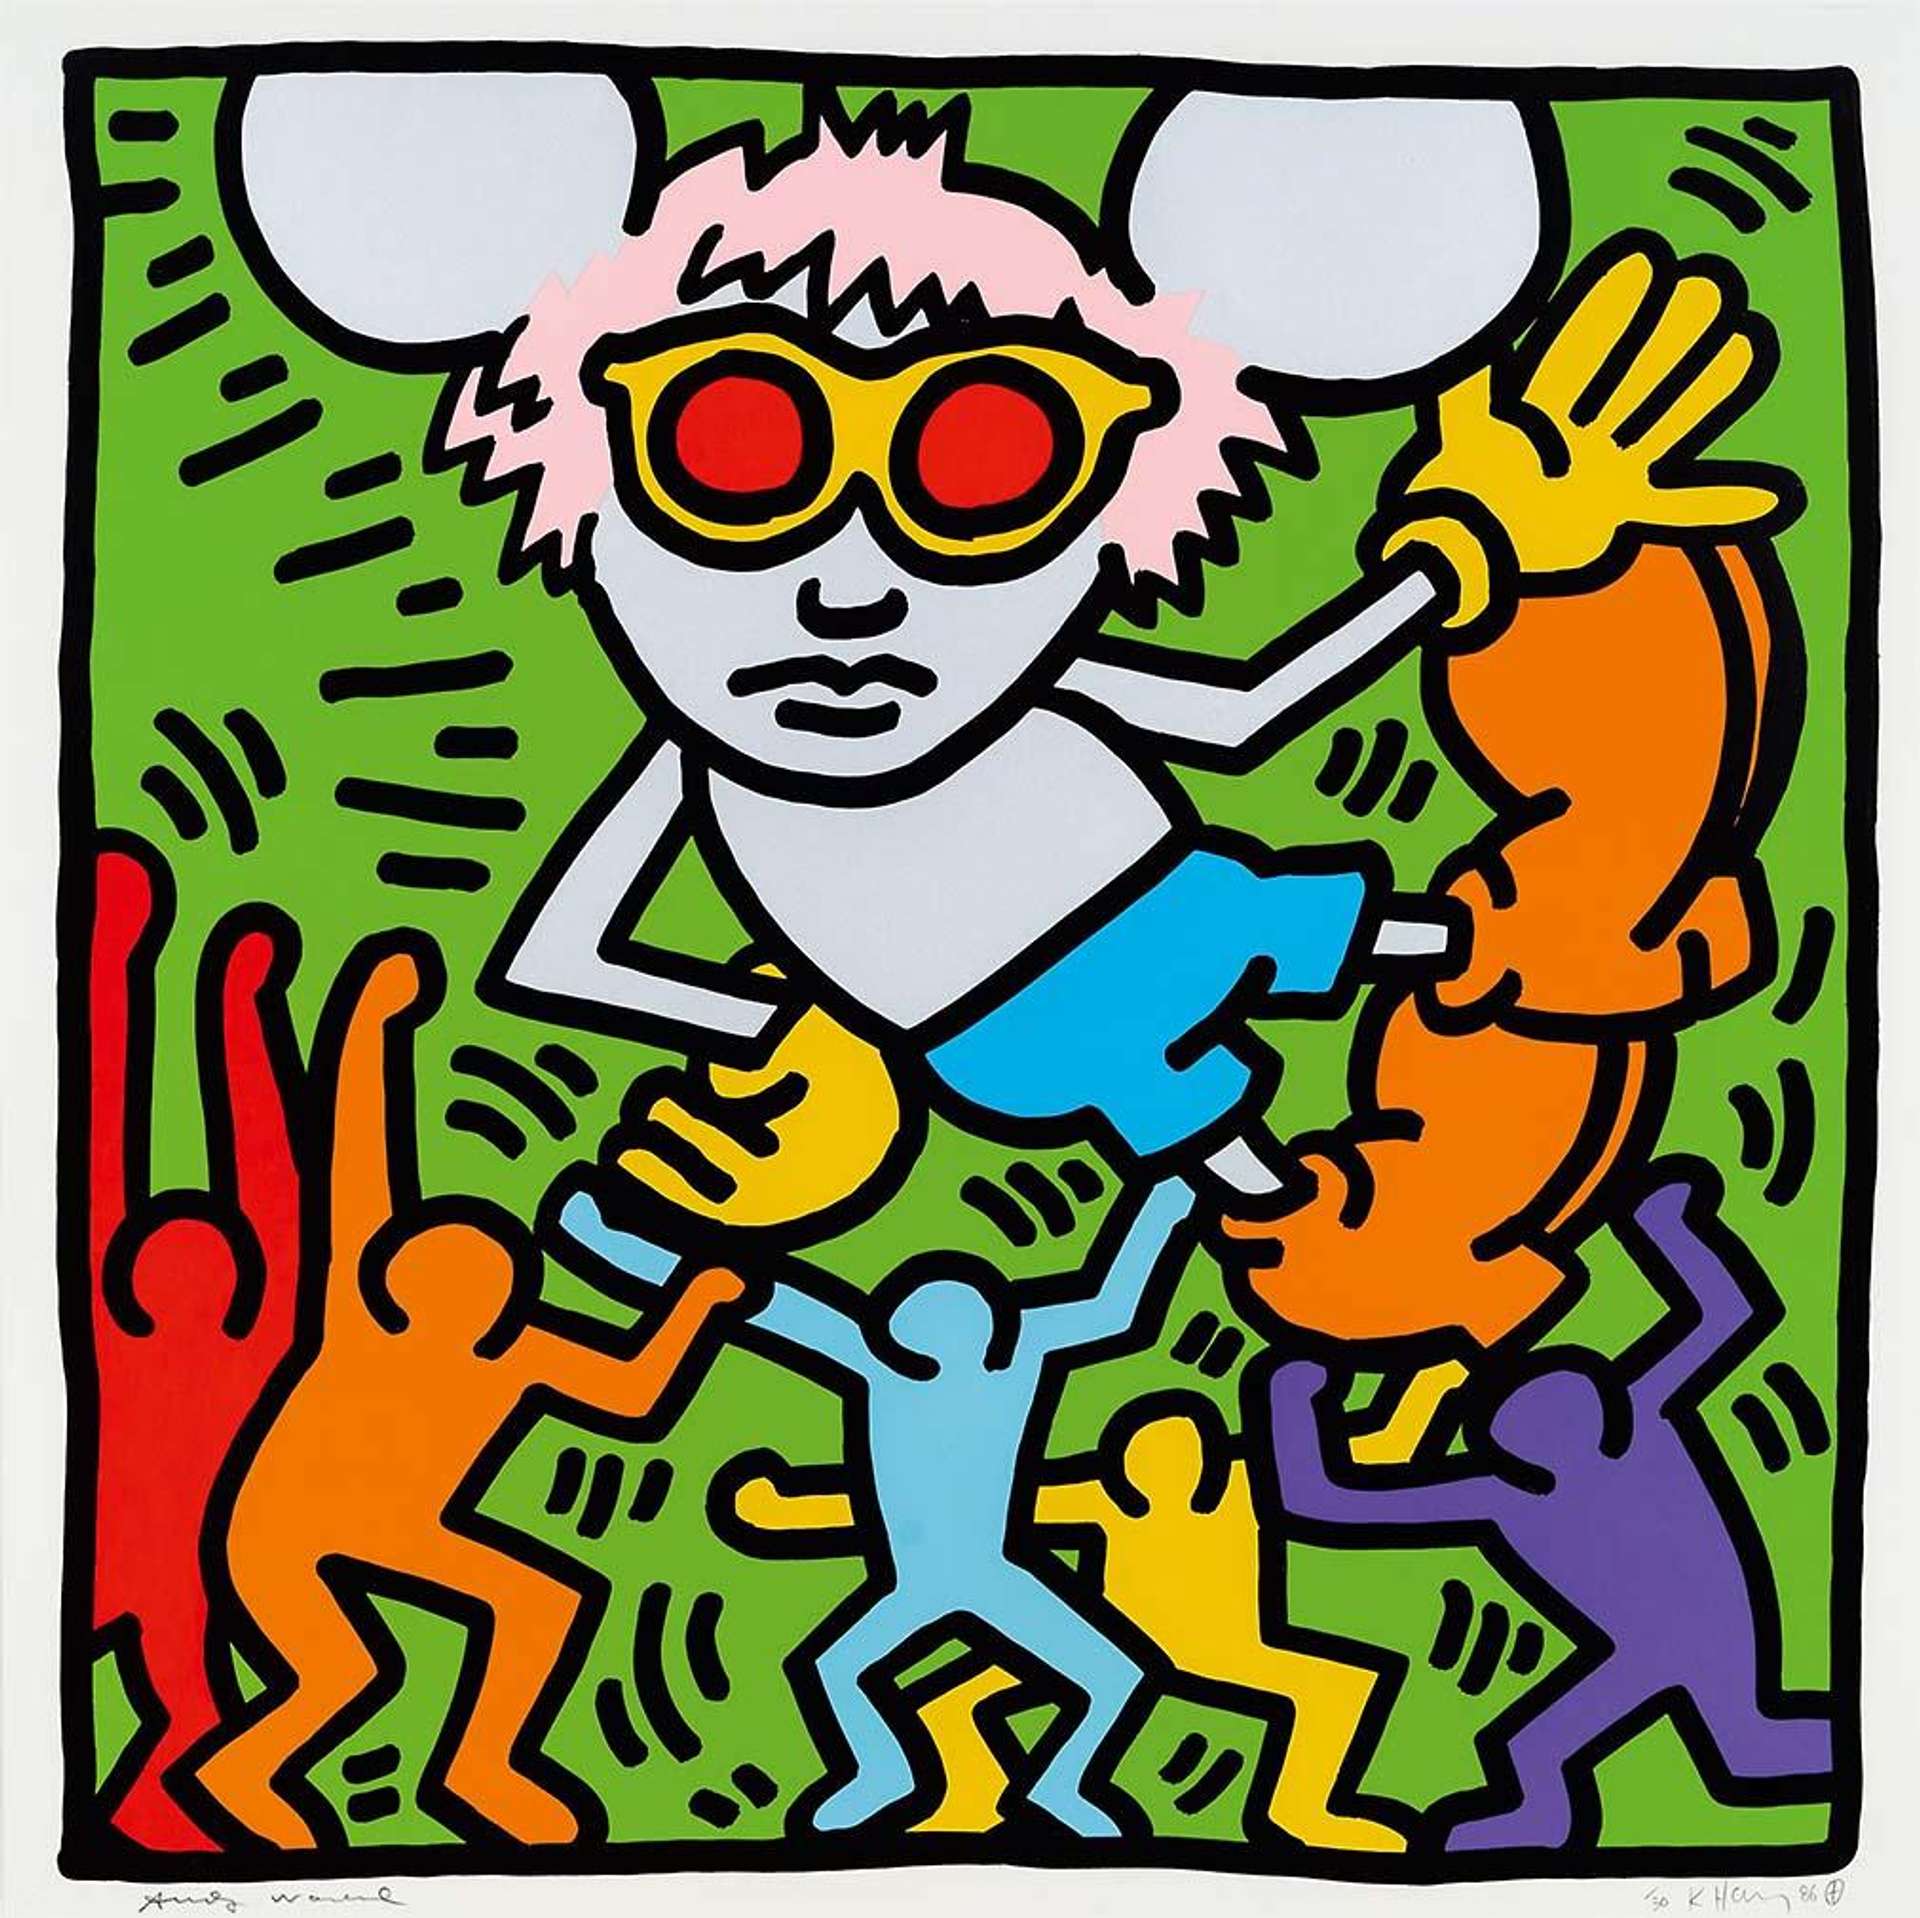 In this print, Keith Haring depicts Andy Warhol as a Mickey Mouse figure held aloft by a group of his signature dancing figures, all emitting energy lines of joy while Warhol remains inscrutable.